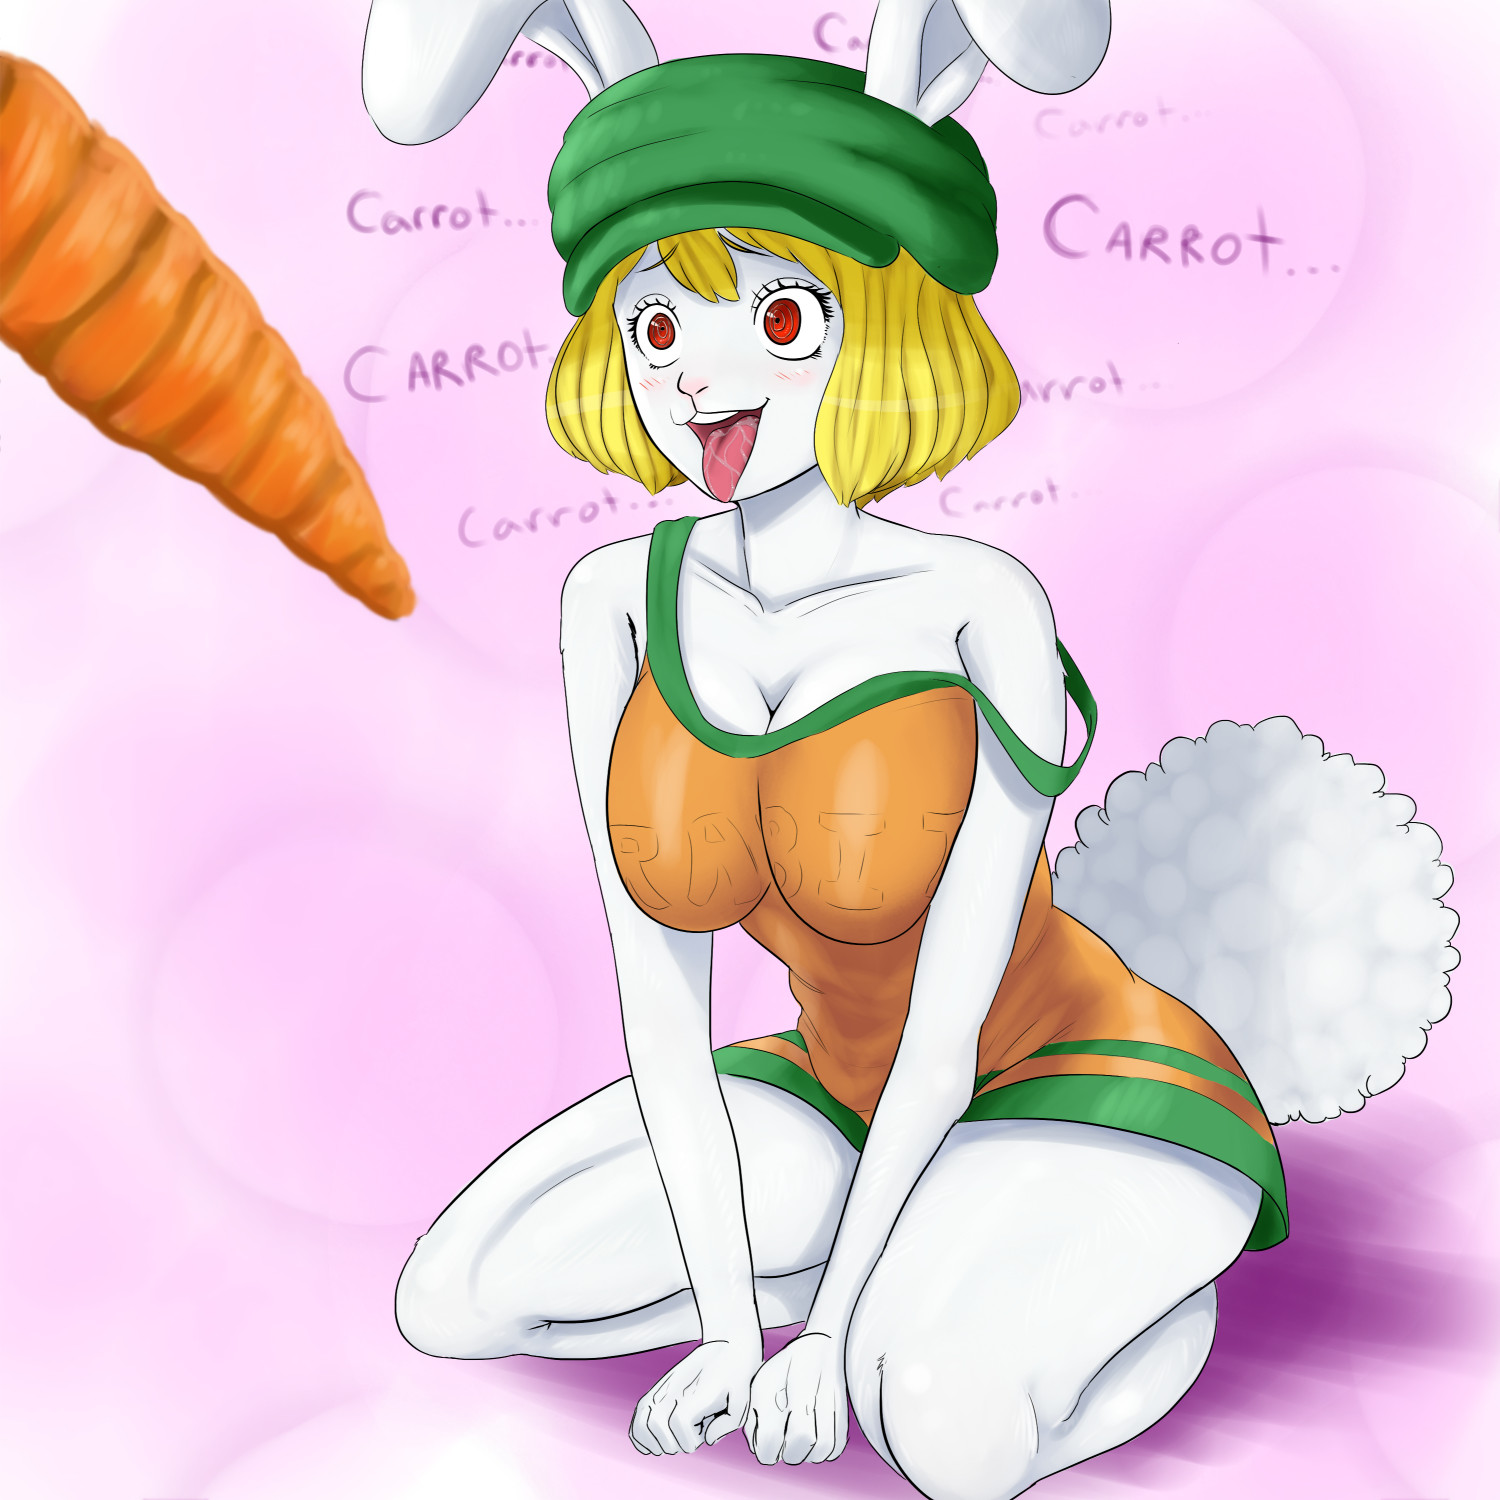 Carrot - One Piece.